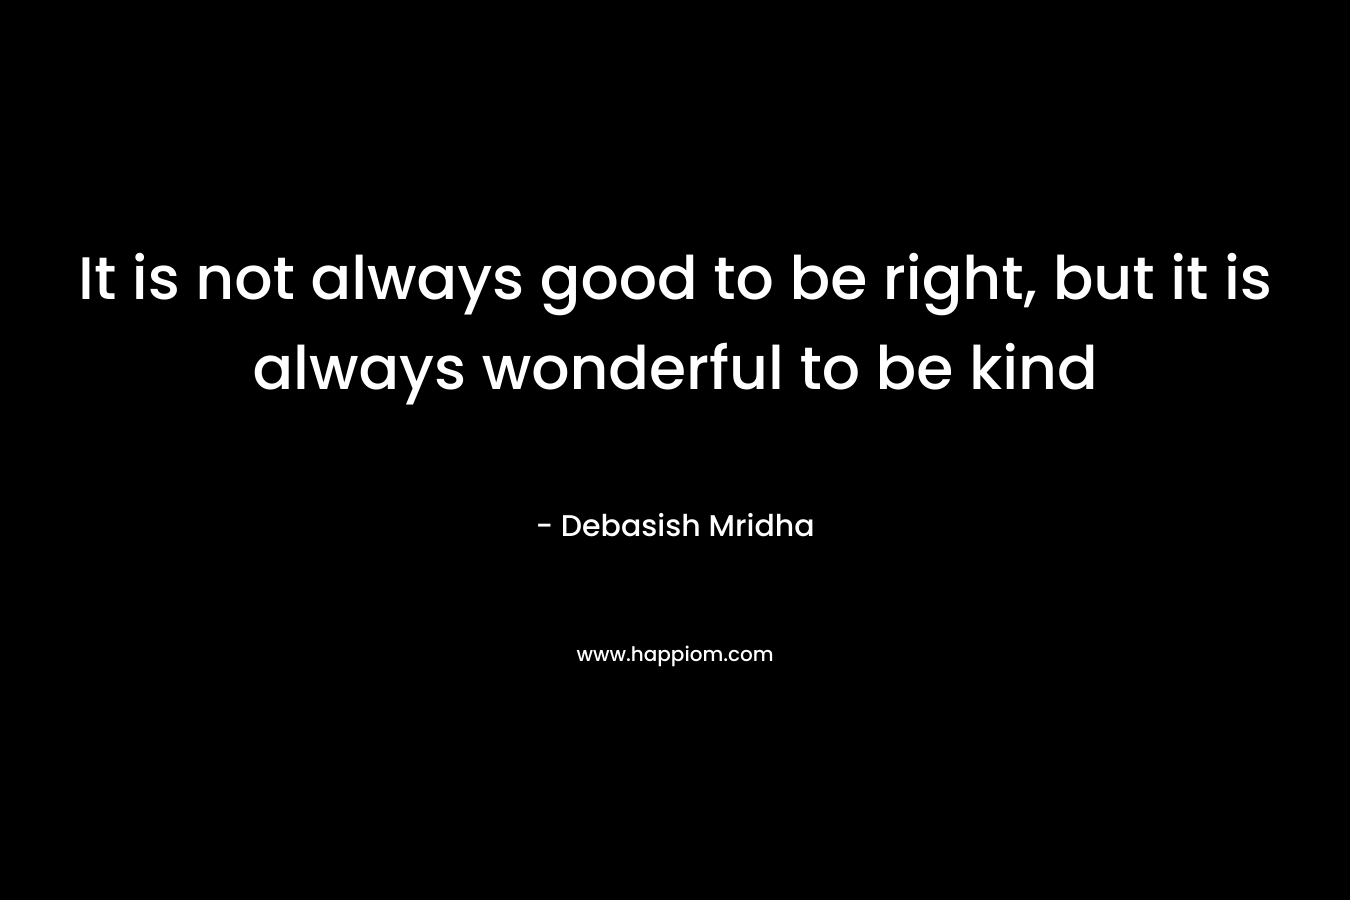 It is not always good to be right, but it is always wonderful to be kind